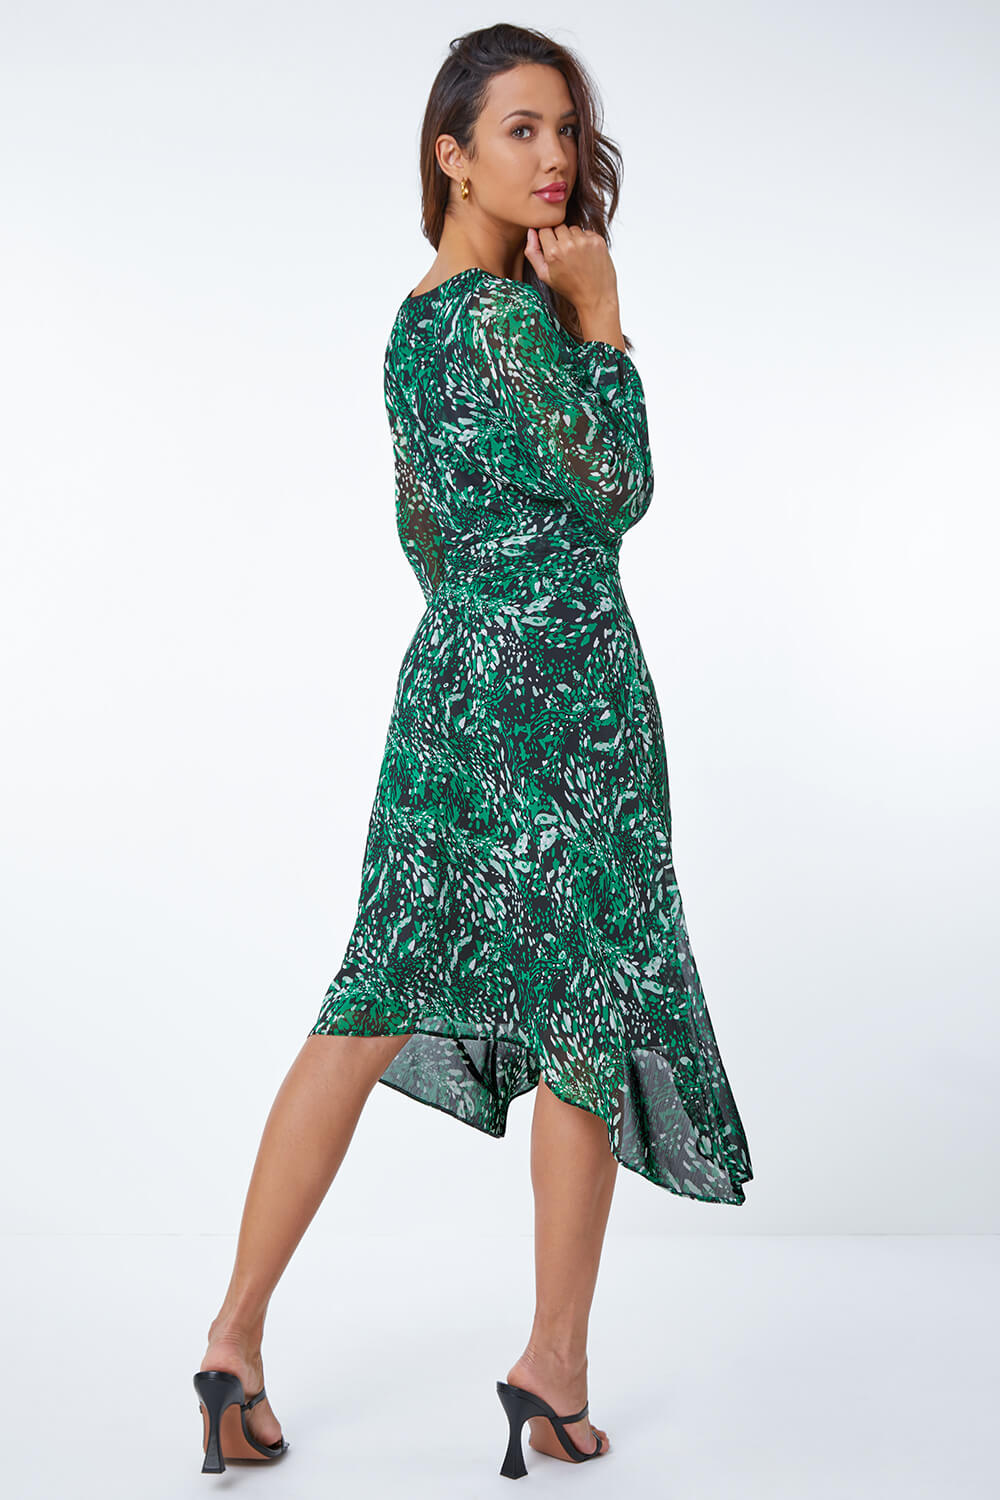 Green Floral Print Belted Midi Dress, Image 3 of 5